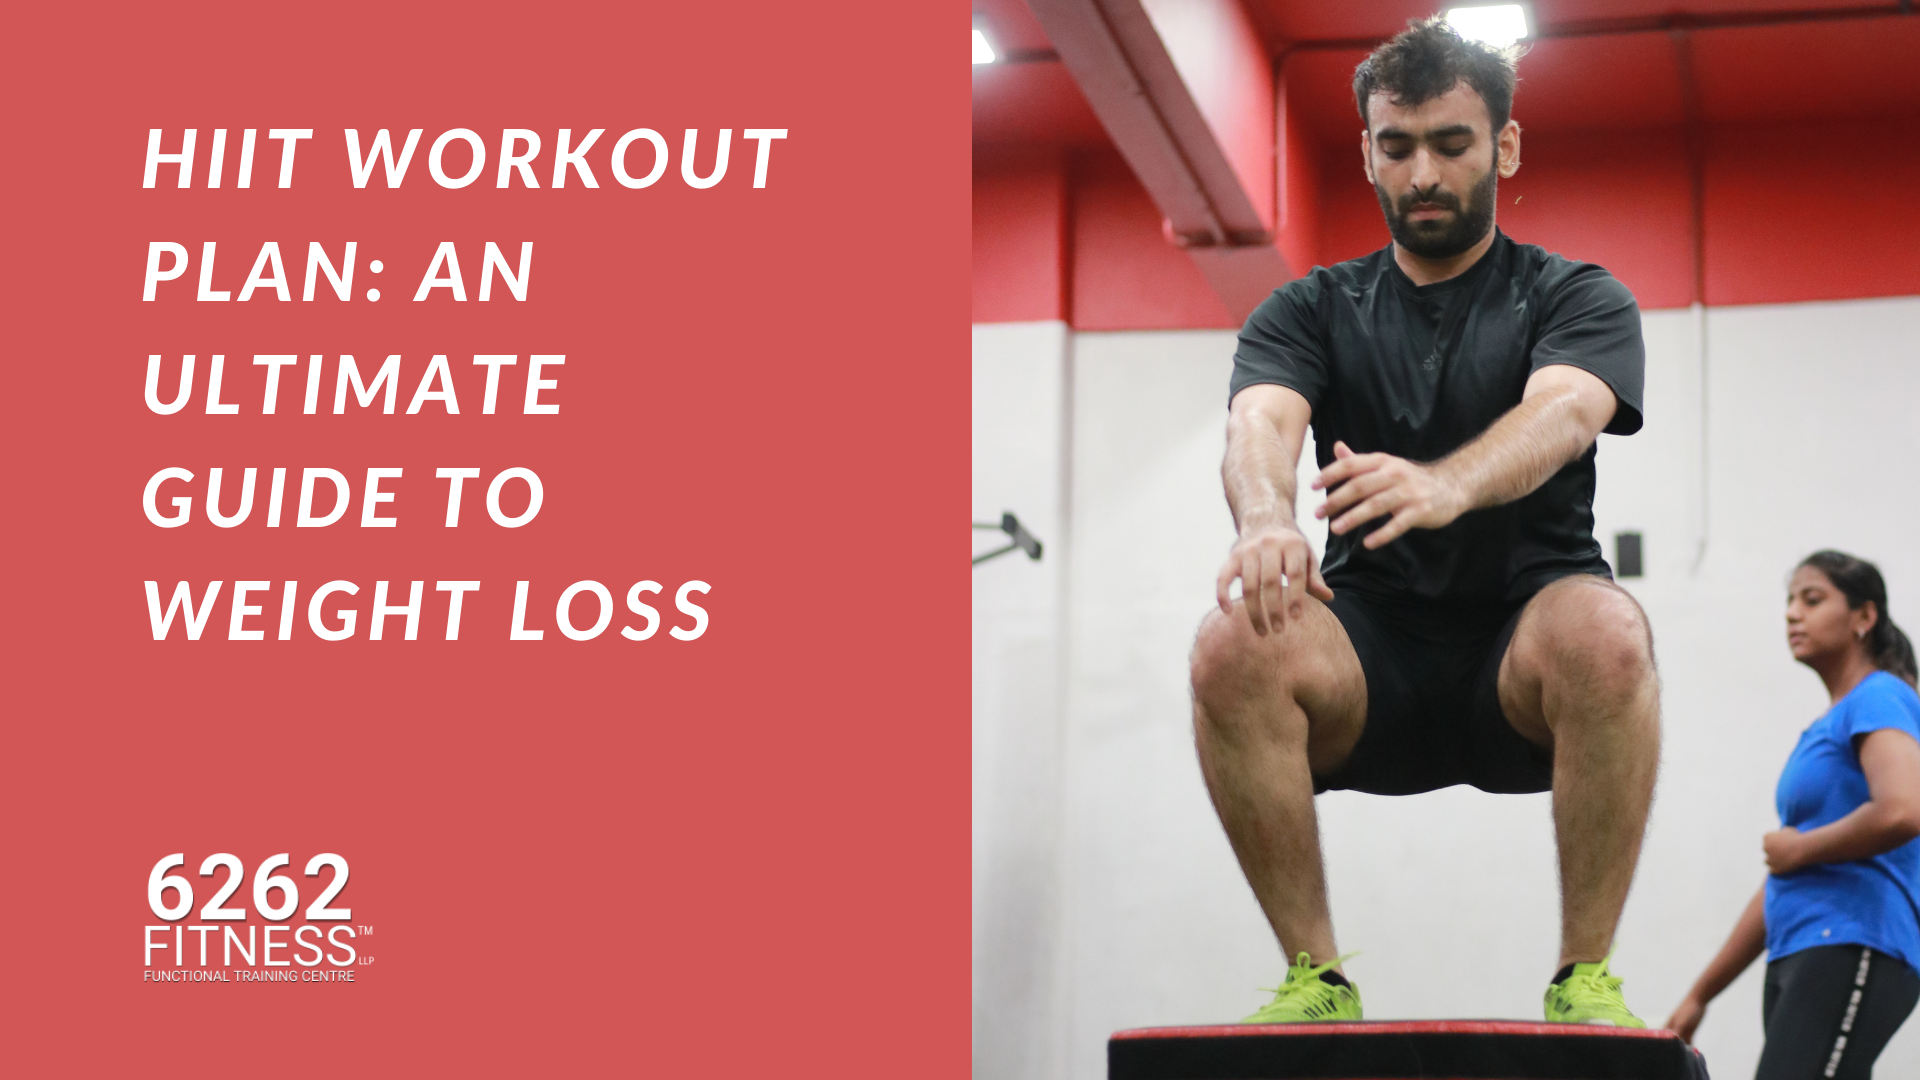 HIIT Workout Plan: An Ultimate Guide to Weight Loss